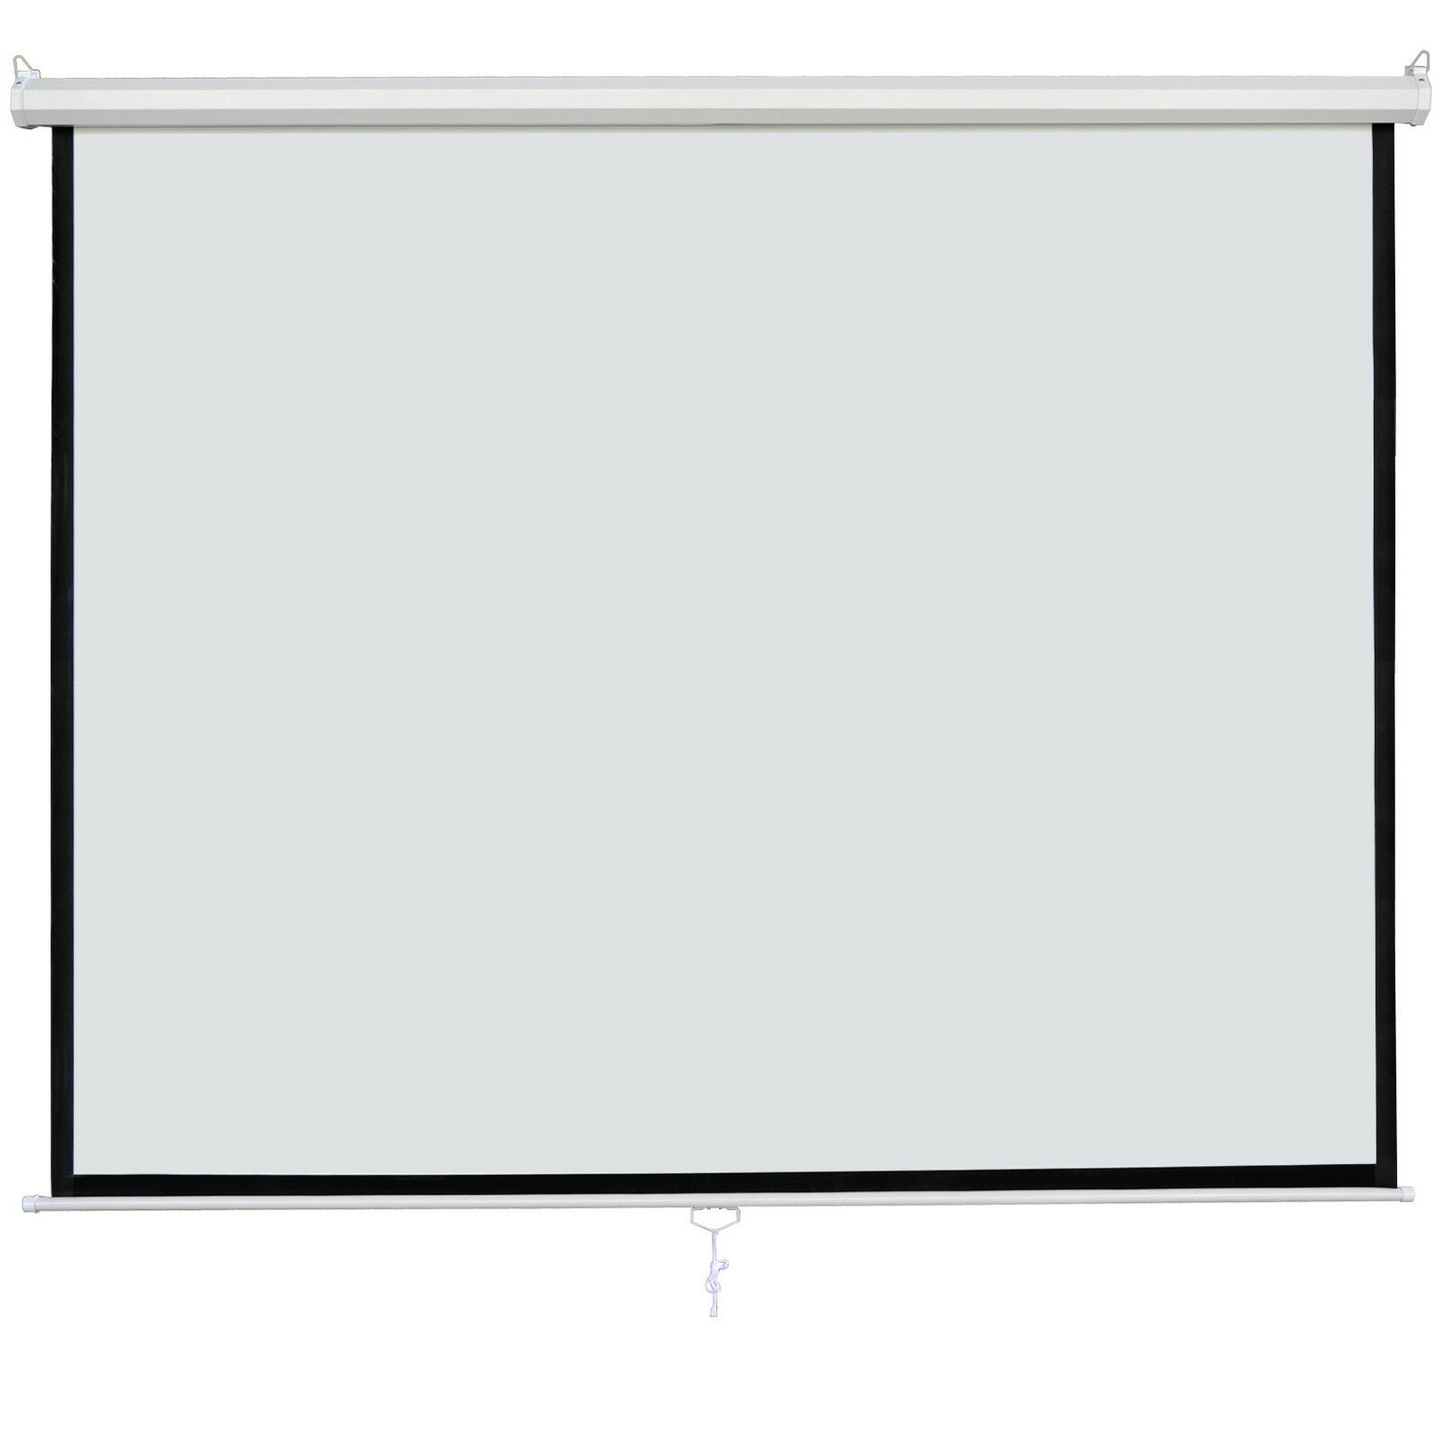 USED 84" X 84" Diagonal Dimension Pull Down Projection Screen HD Movie Theater